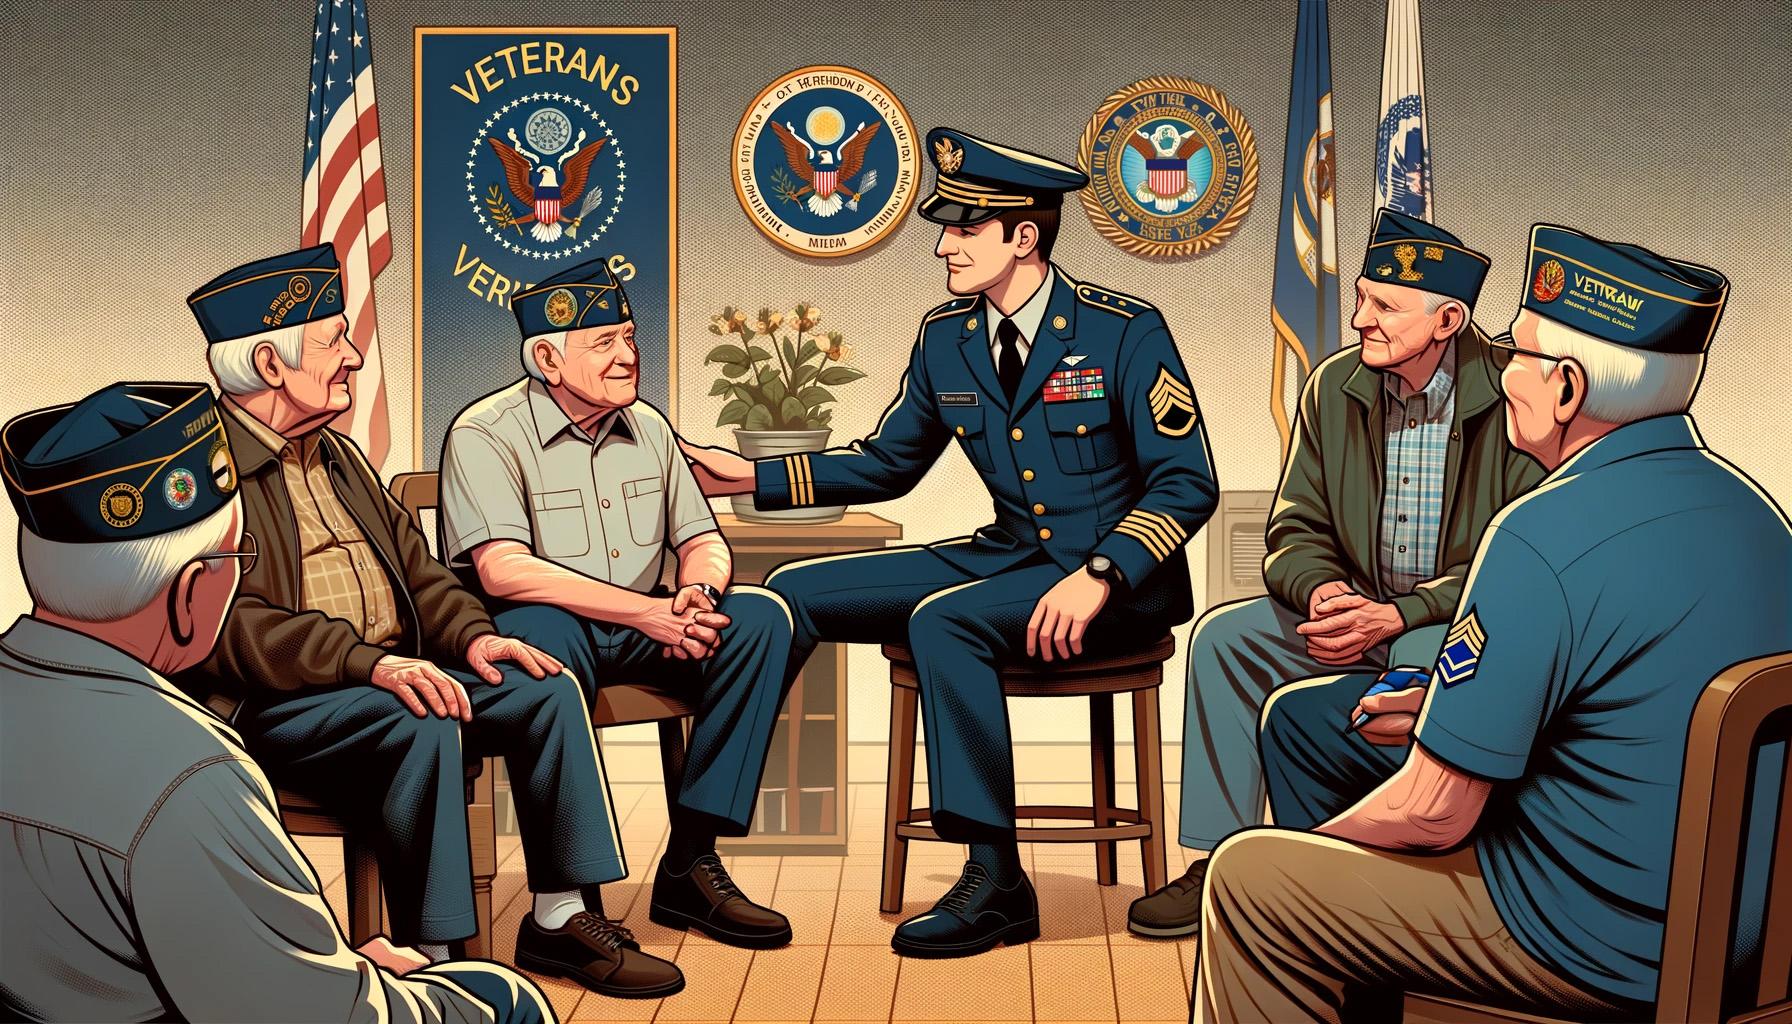 Veteran Service Officer at VFW Post to assist Veterans news graphic